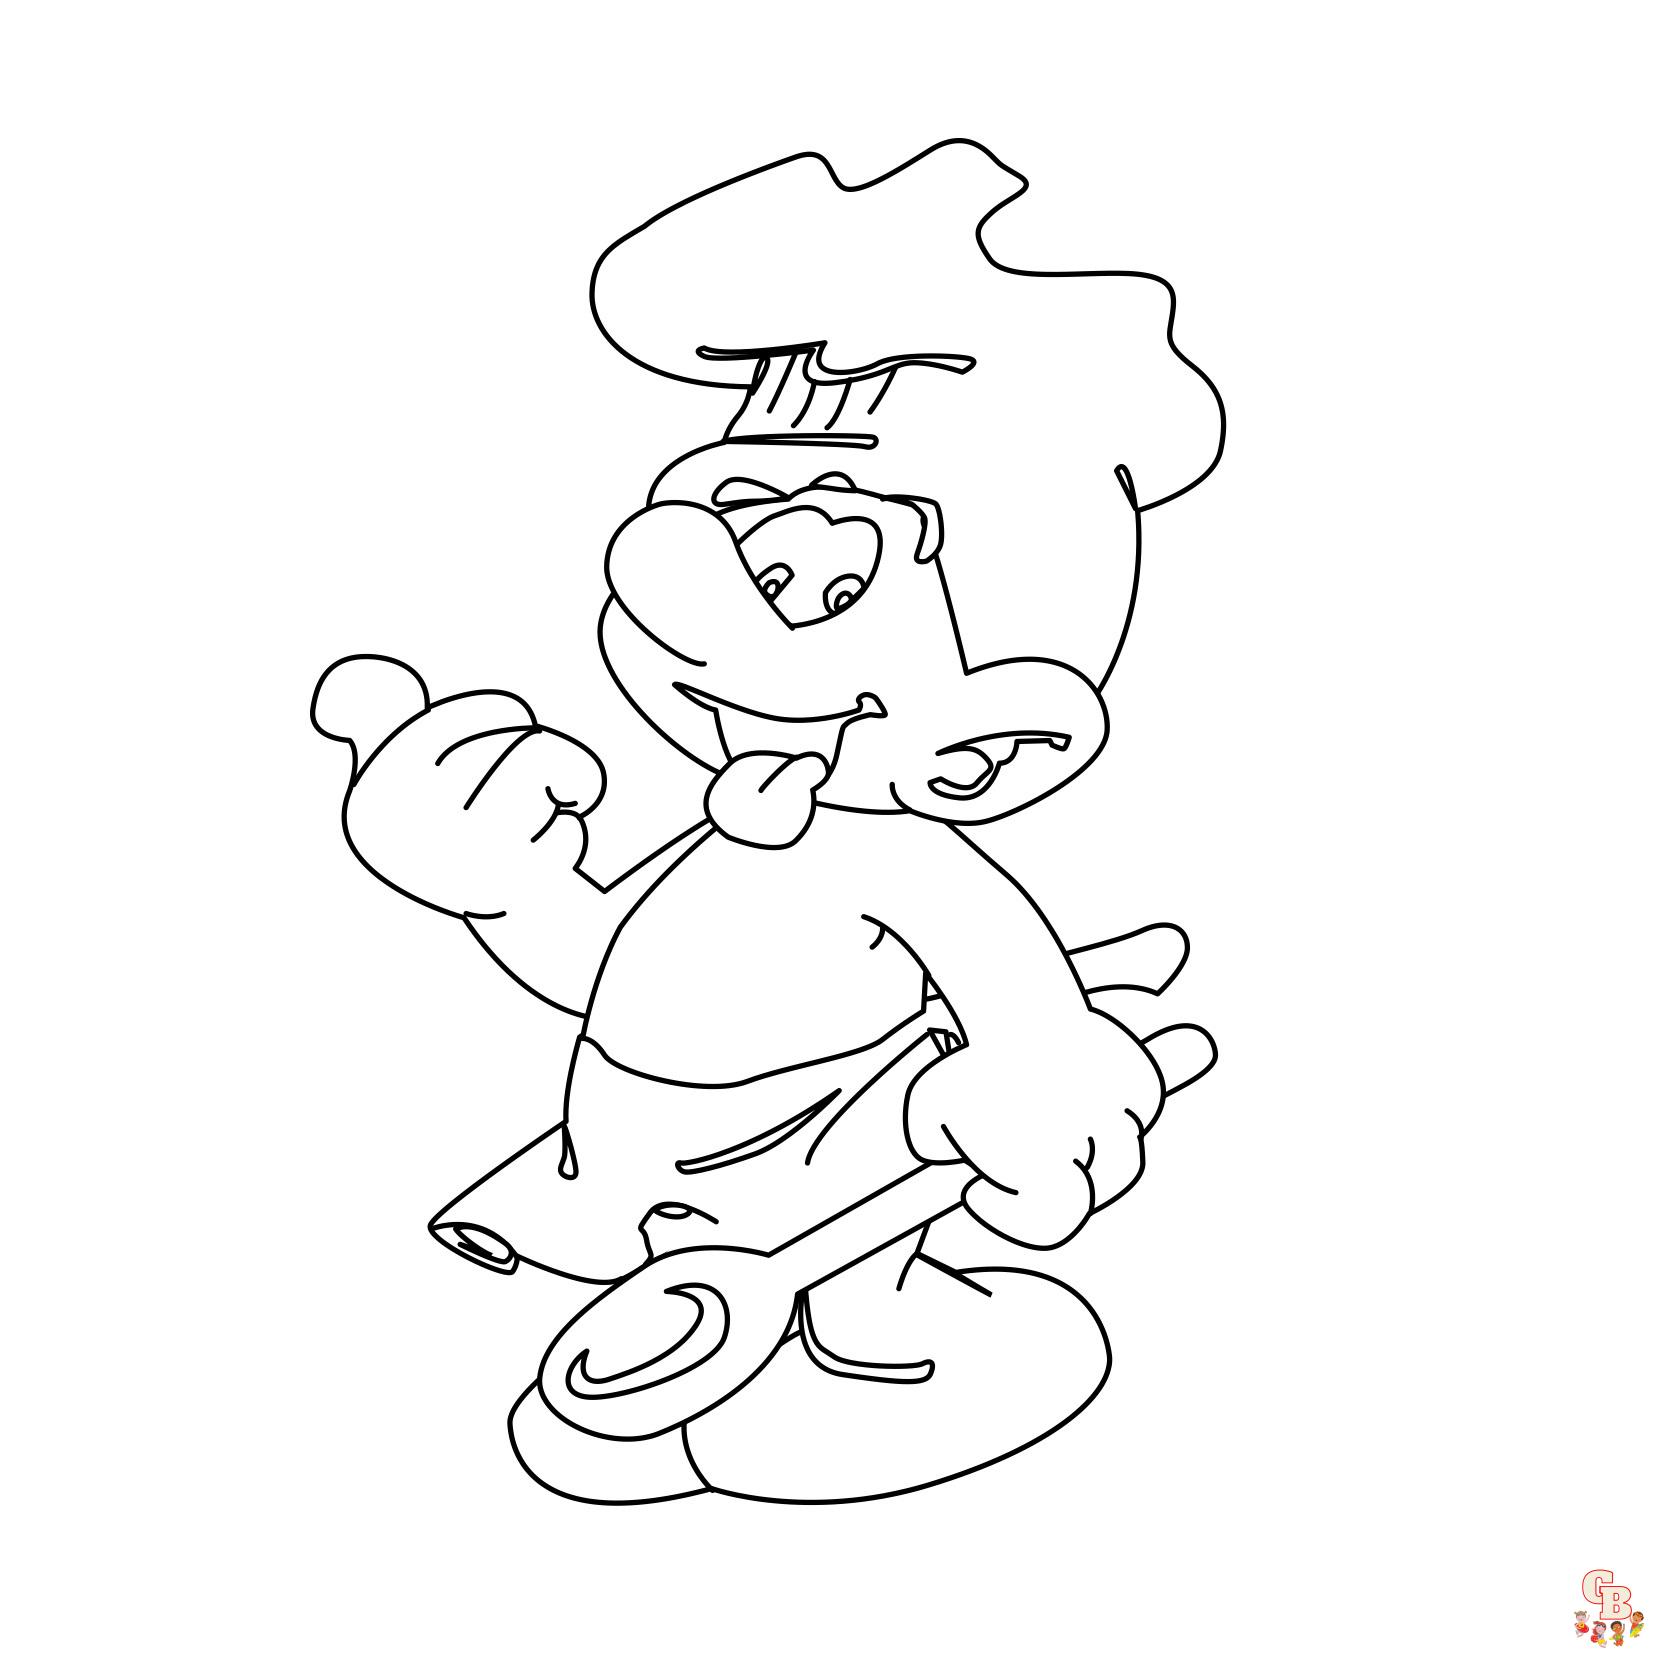 Enjoy hours of smurfs coloring pages